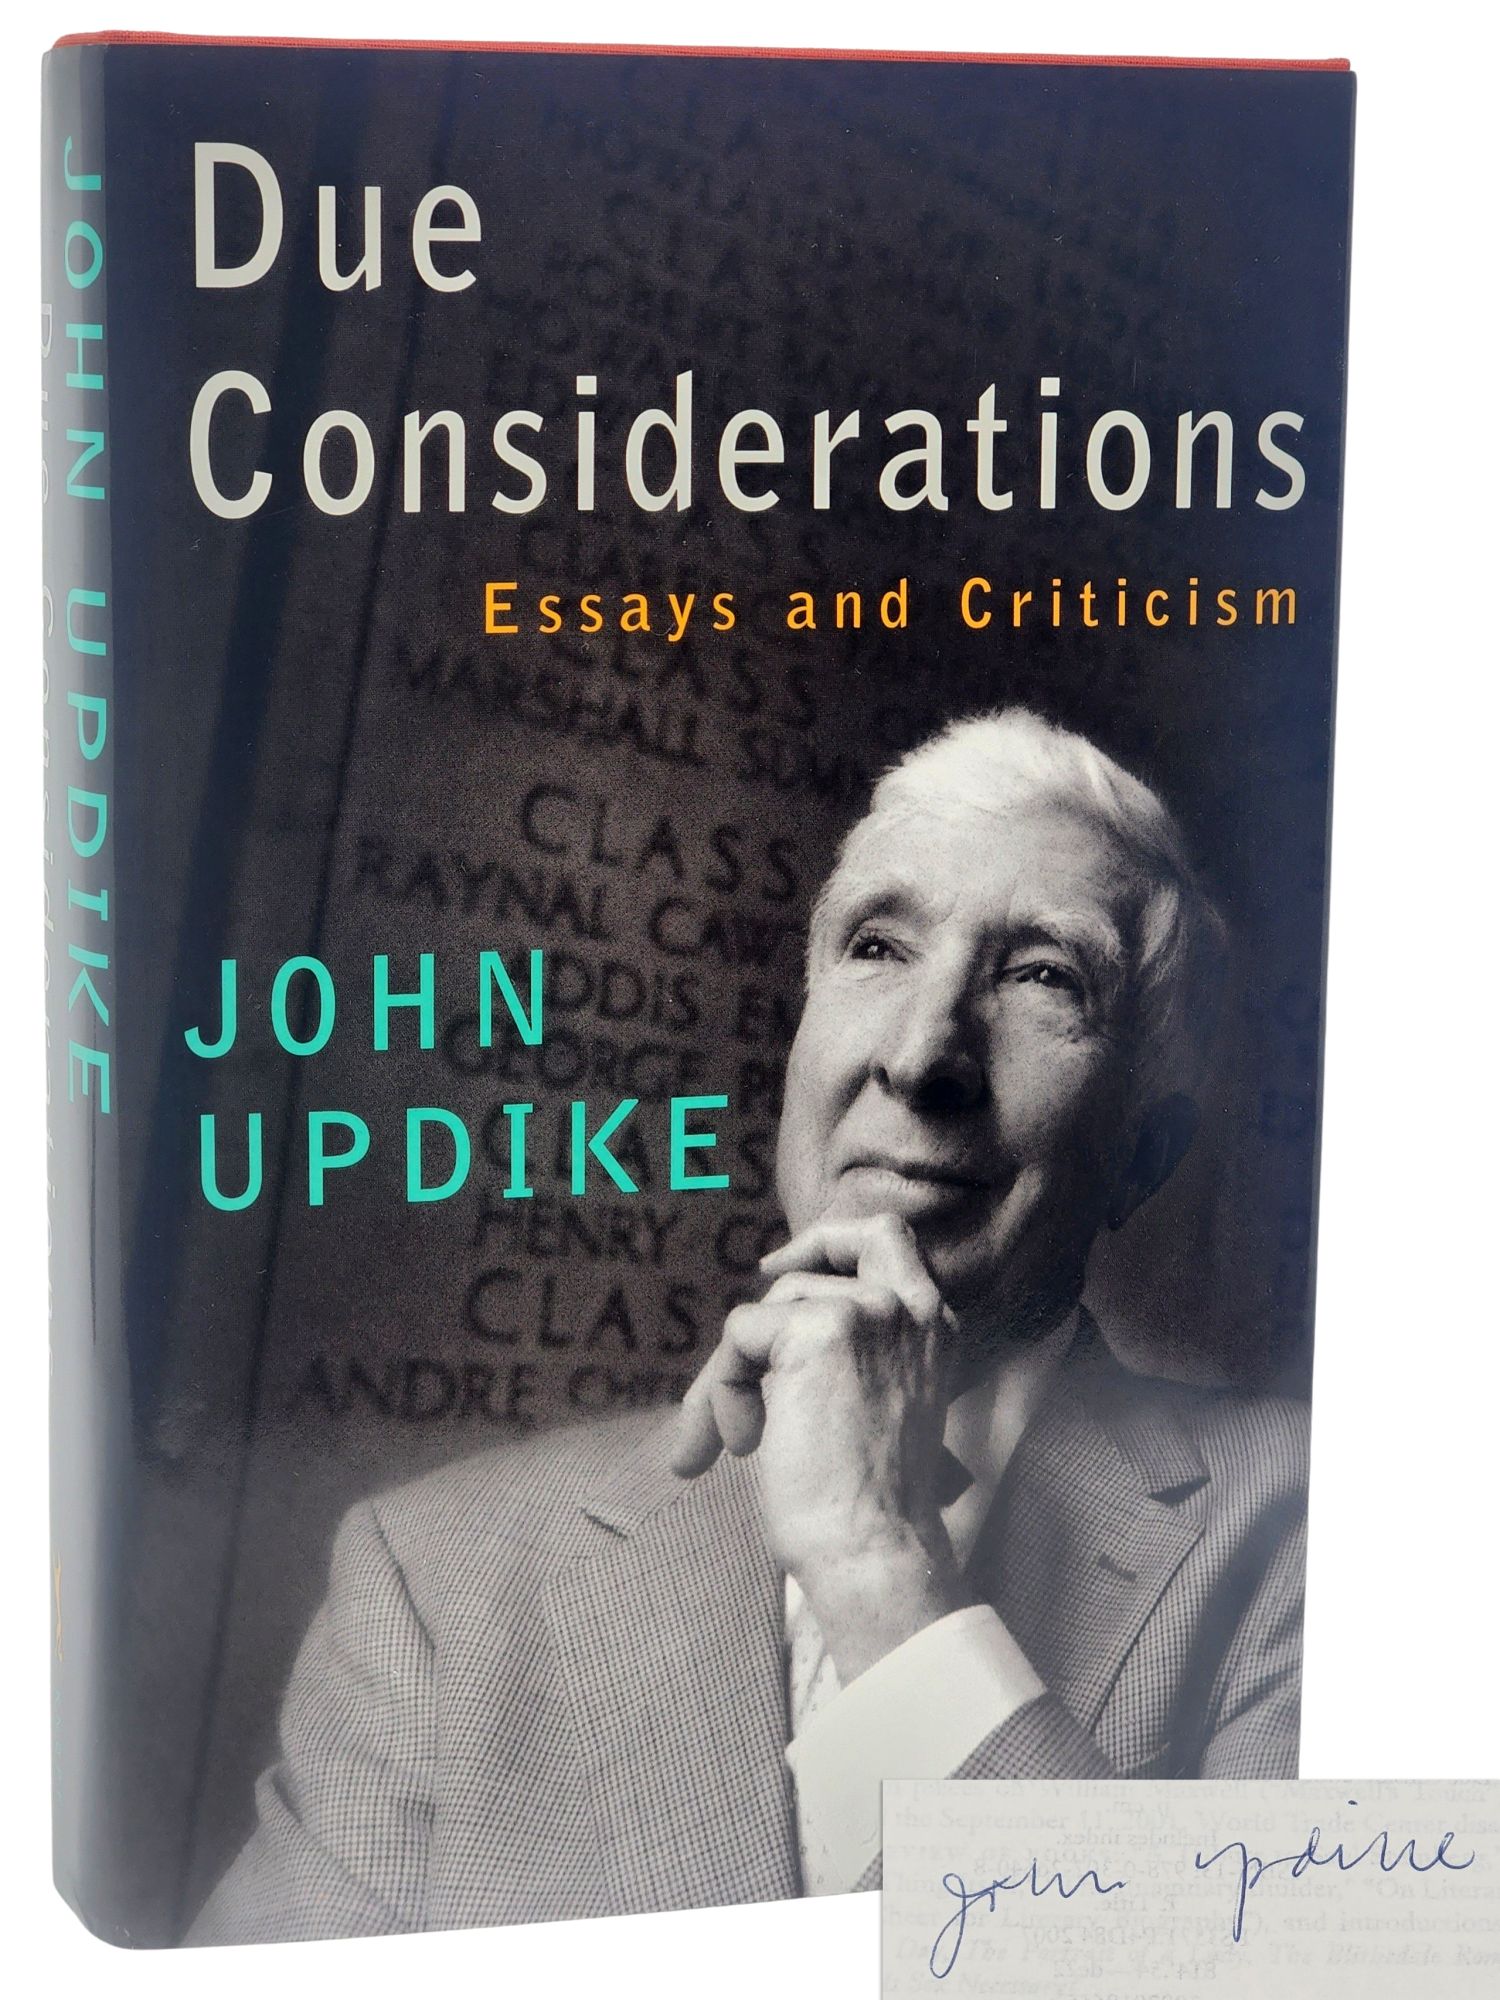 [Book #30451] DUE CONSIDERATIONS. Essays and Criticisms. John Updike.